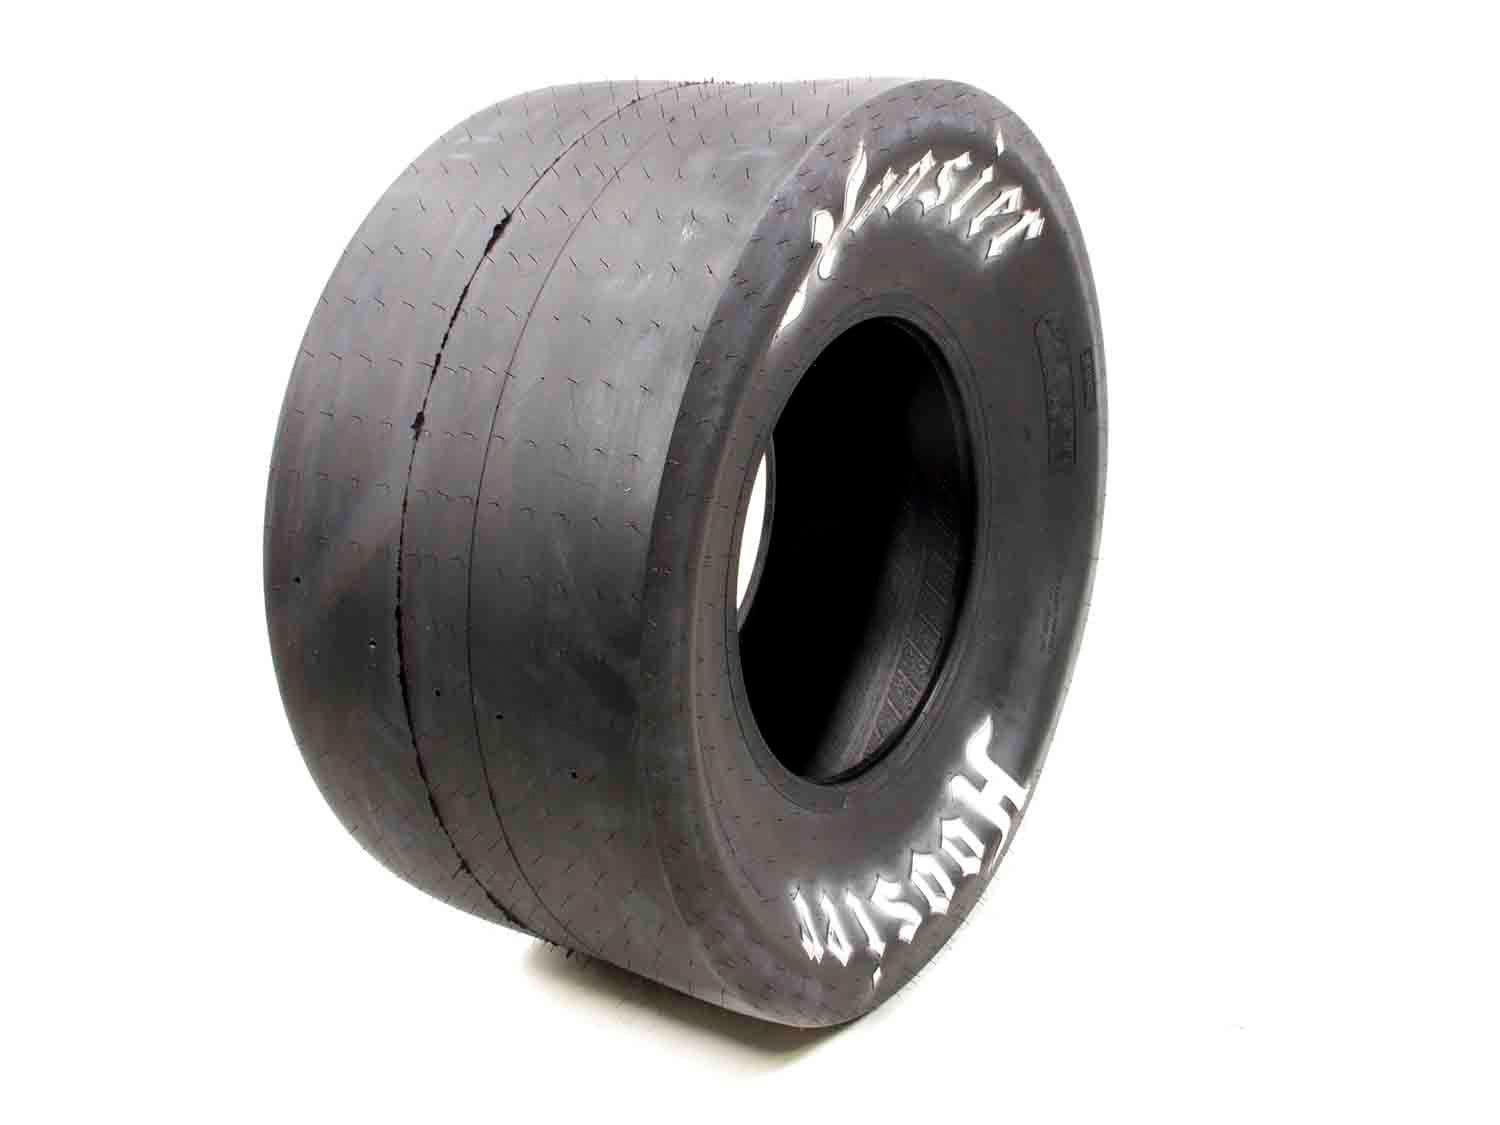 30.0/10.5R-15 Radial Drag Tire - Burlile Performance Products